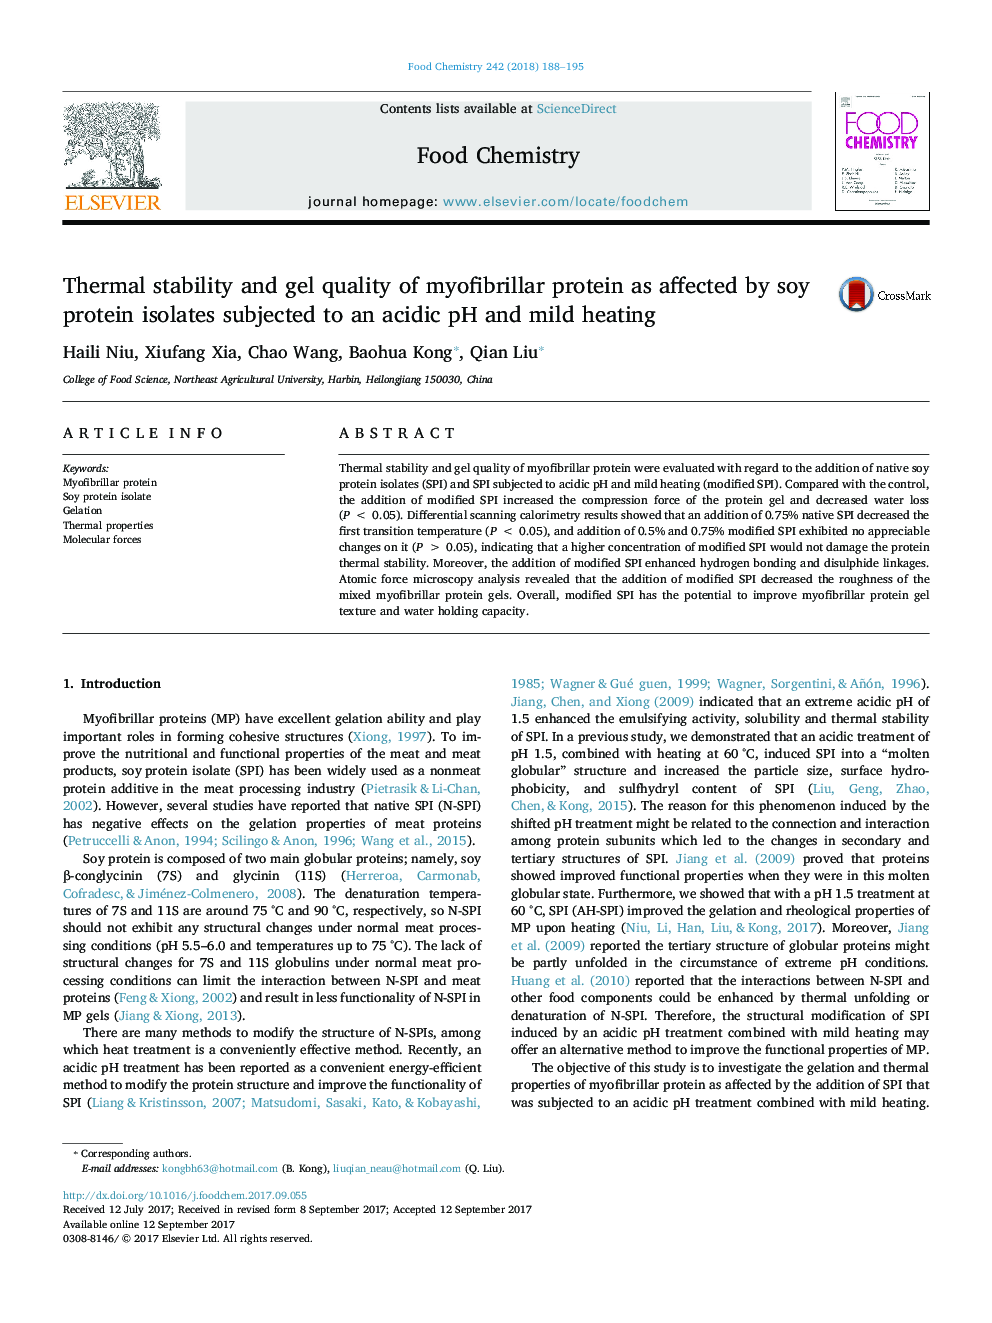 Thermal stability and gel quality of myofibrillar protein as affected by soy protein isolates subjected to an acidic pH and mild heating